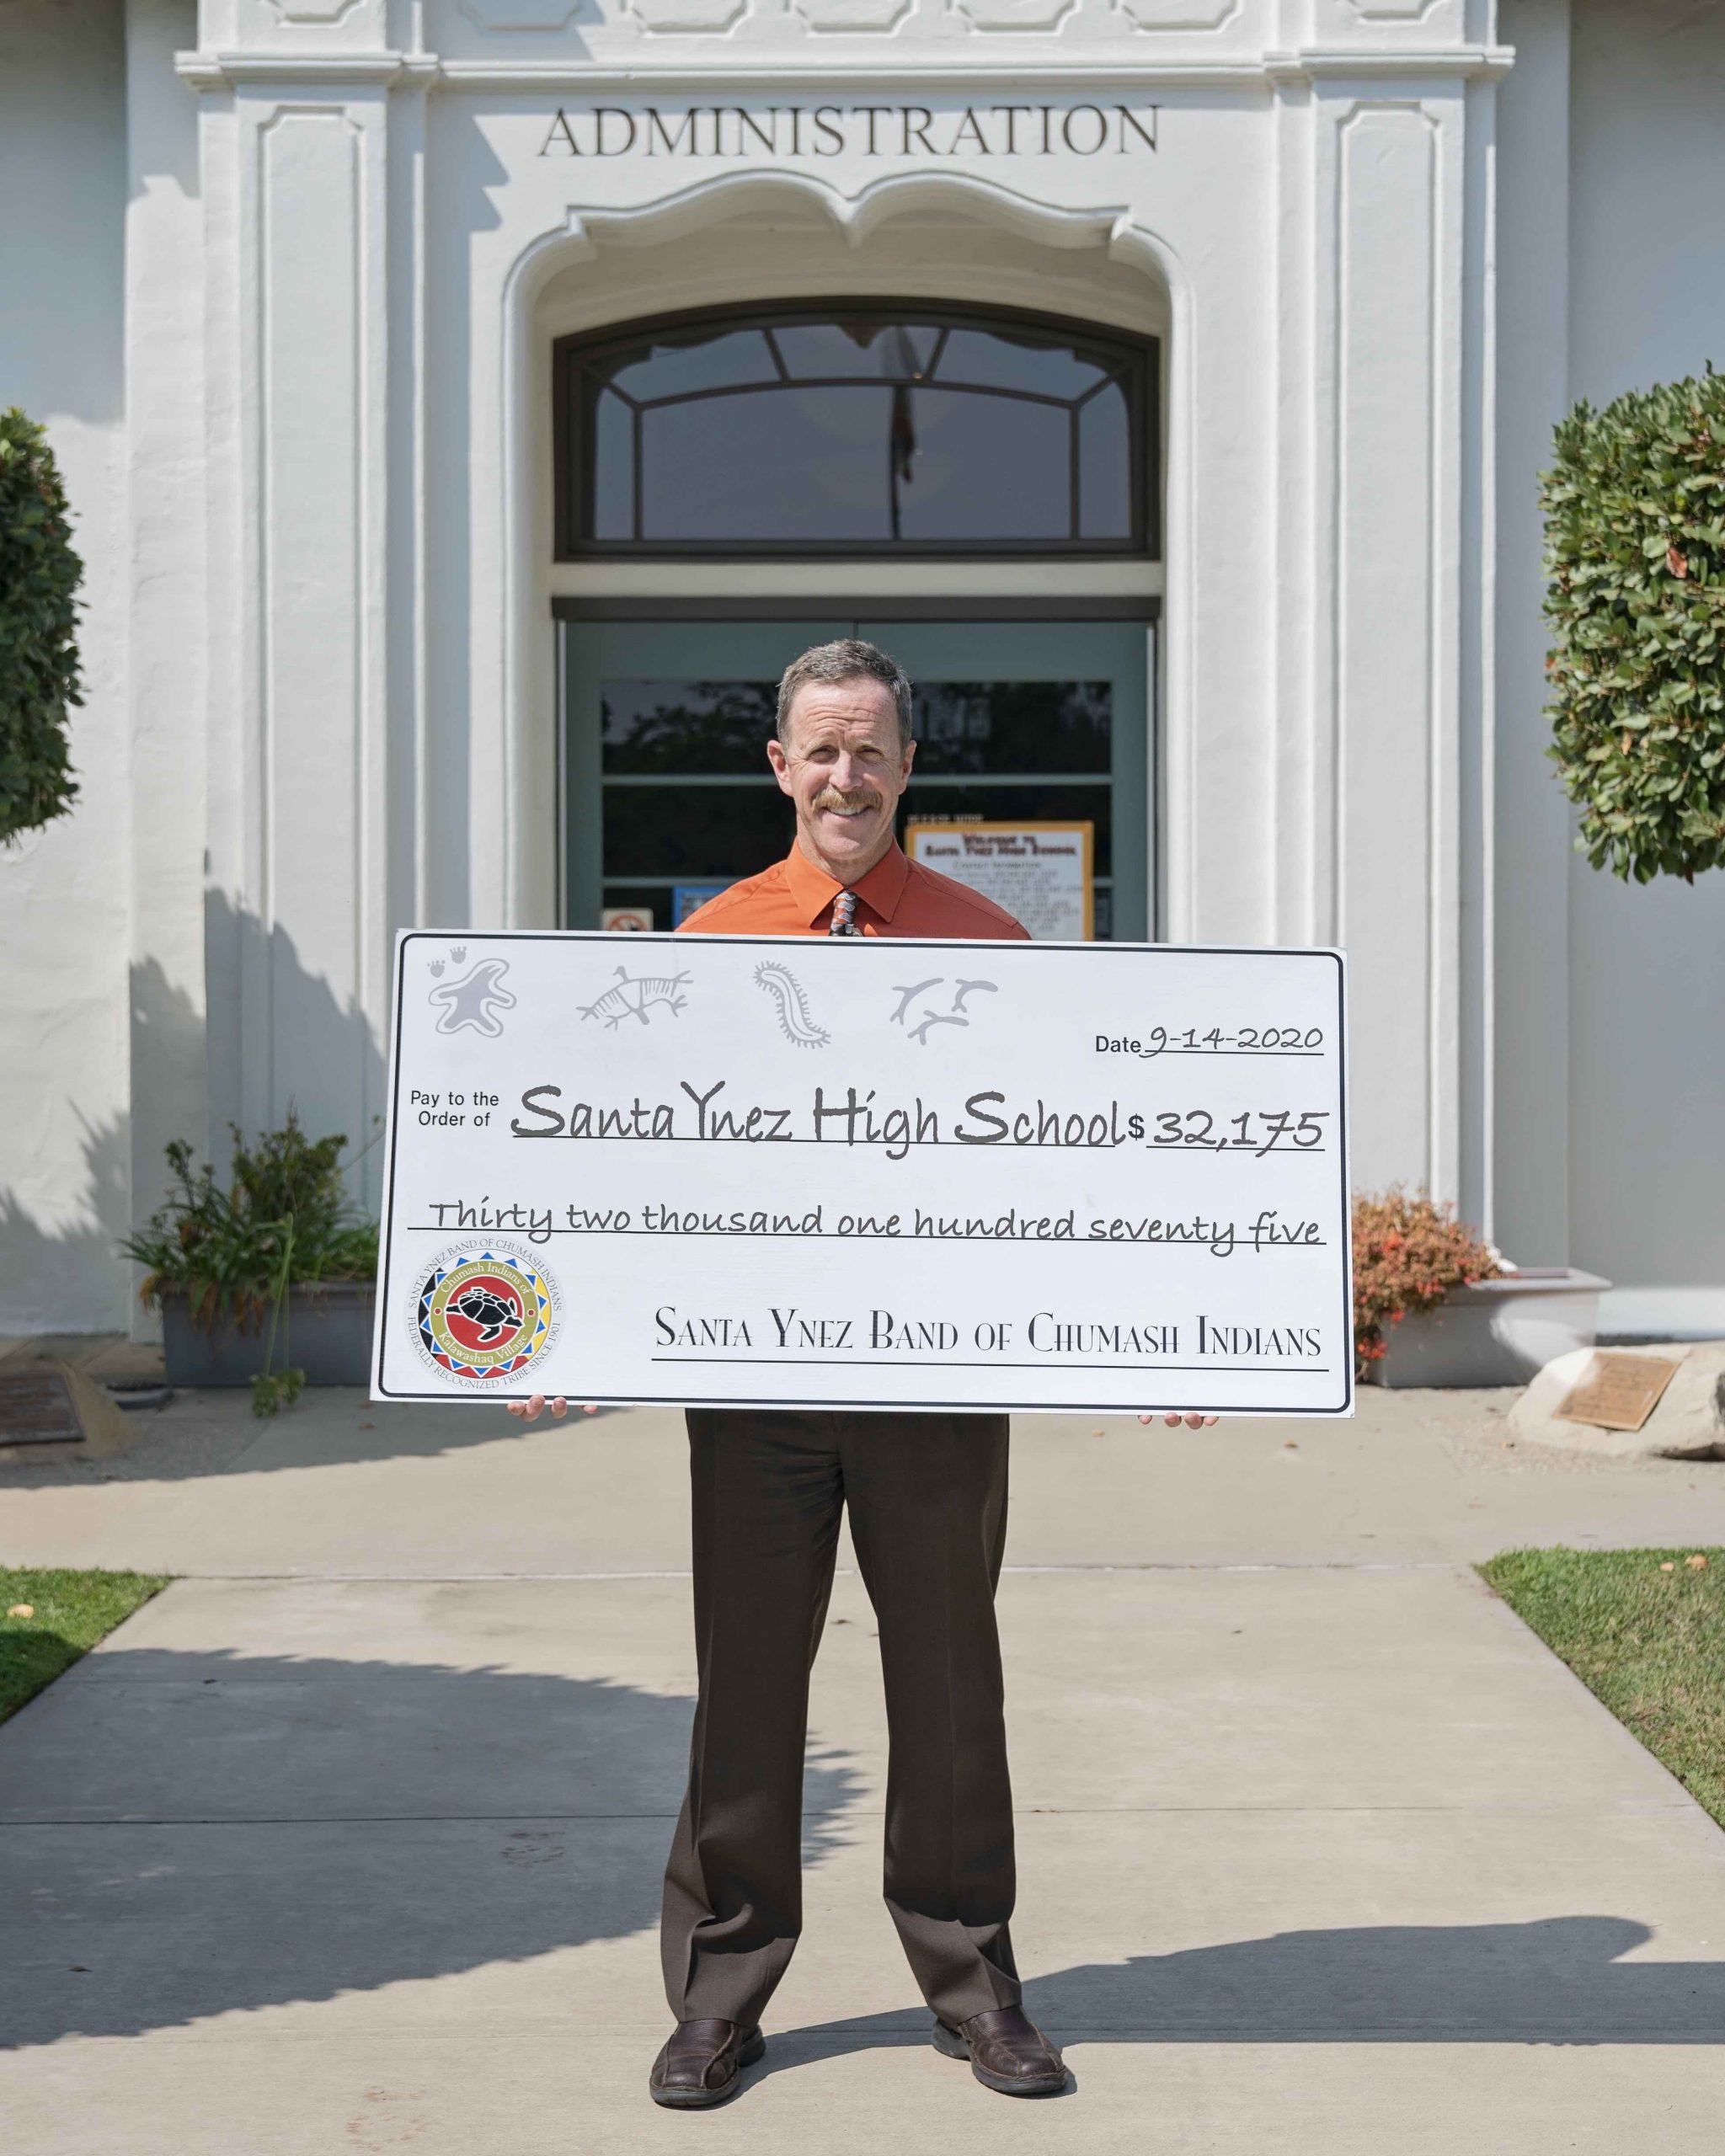 Chumash distribute $100,000 in donations to SYV schools